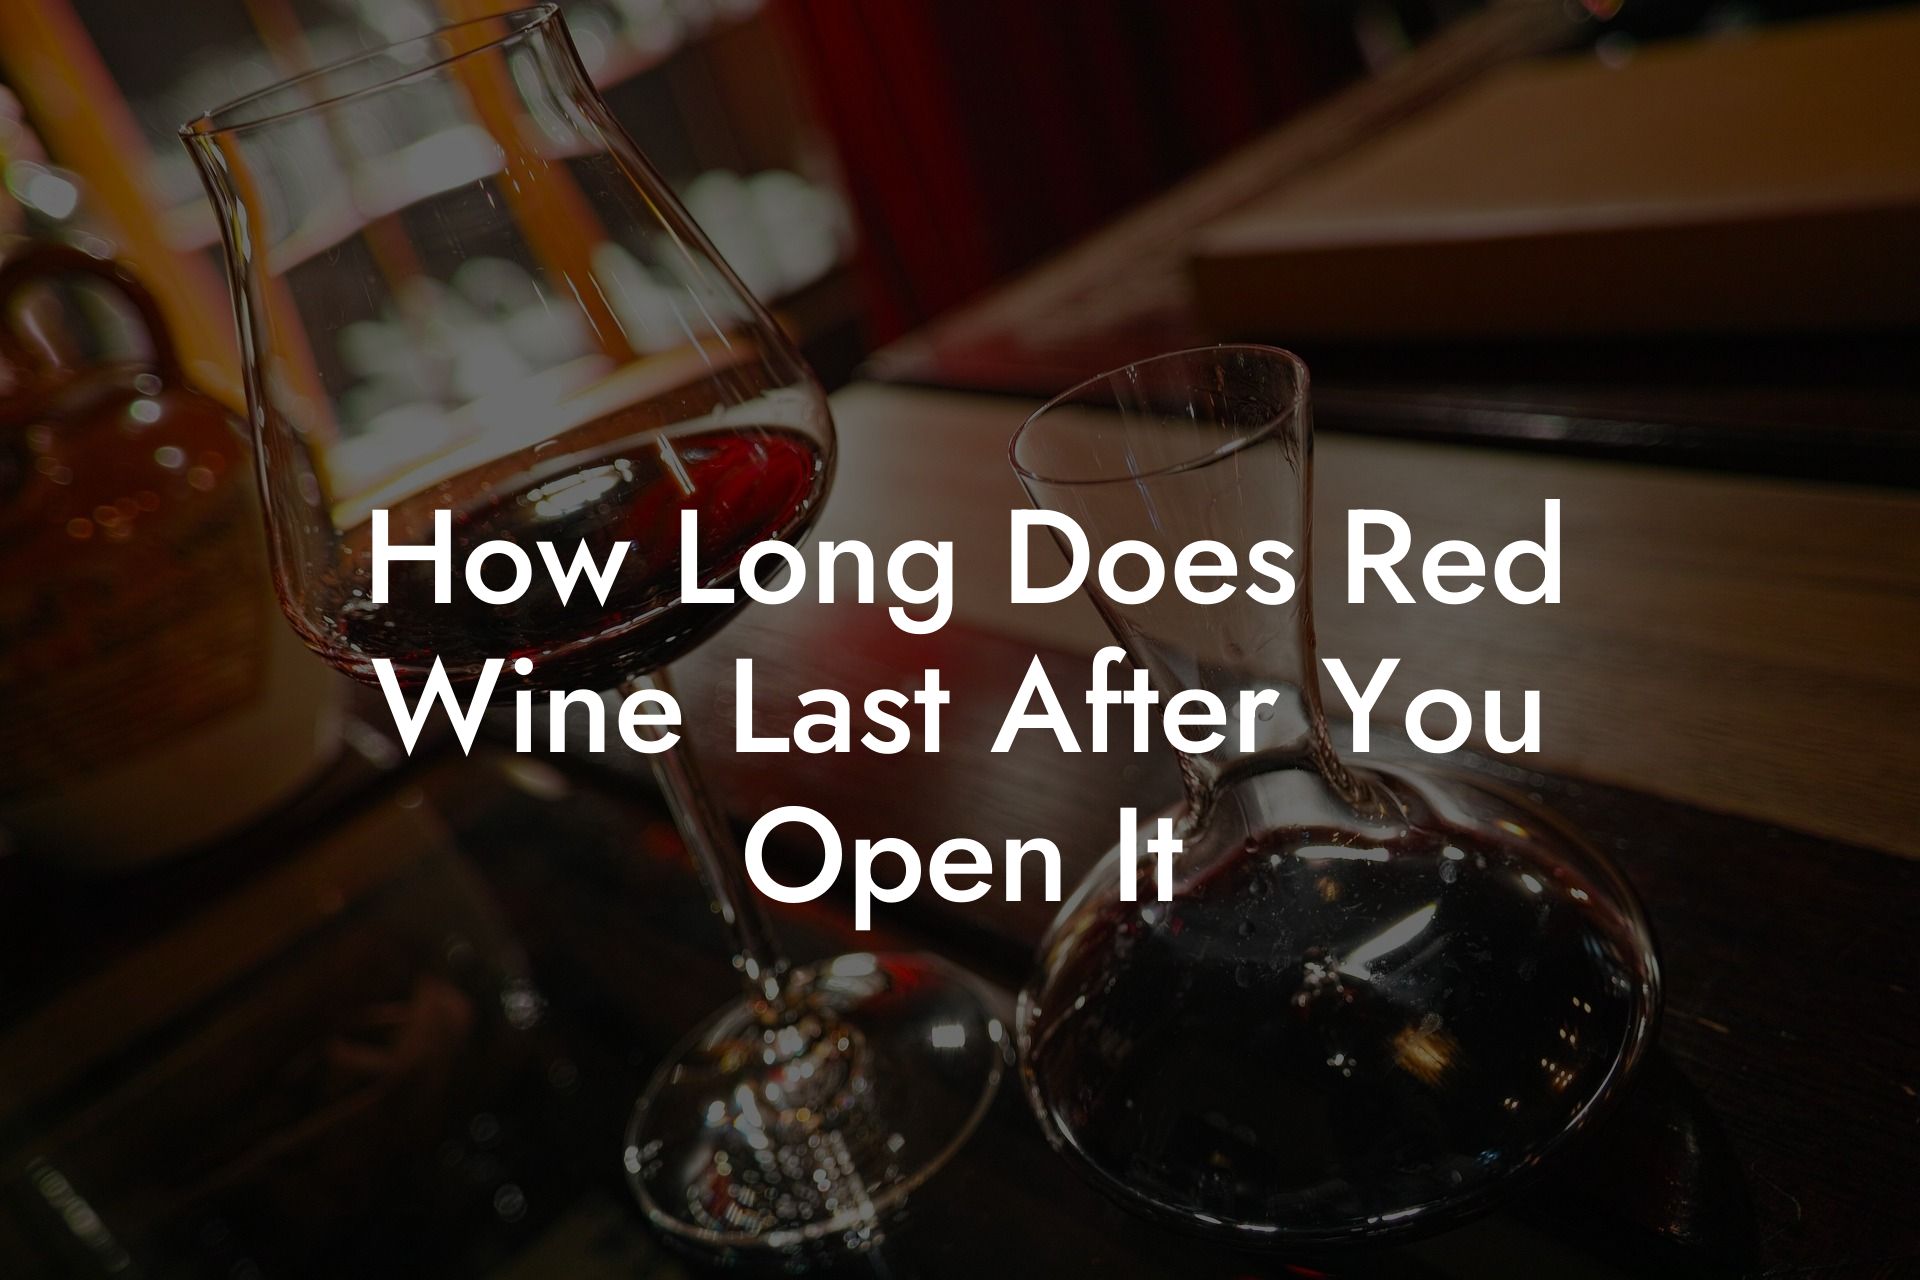 How Long Does Red Wine Last After You Open It